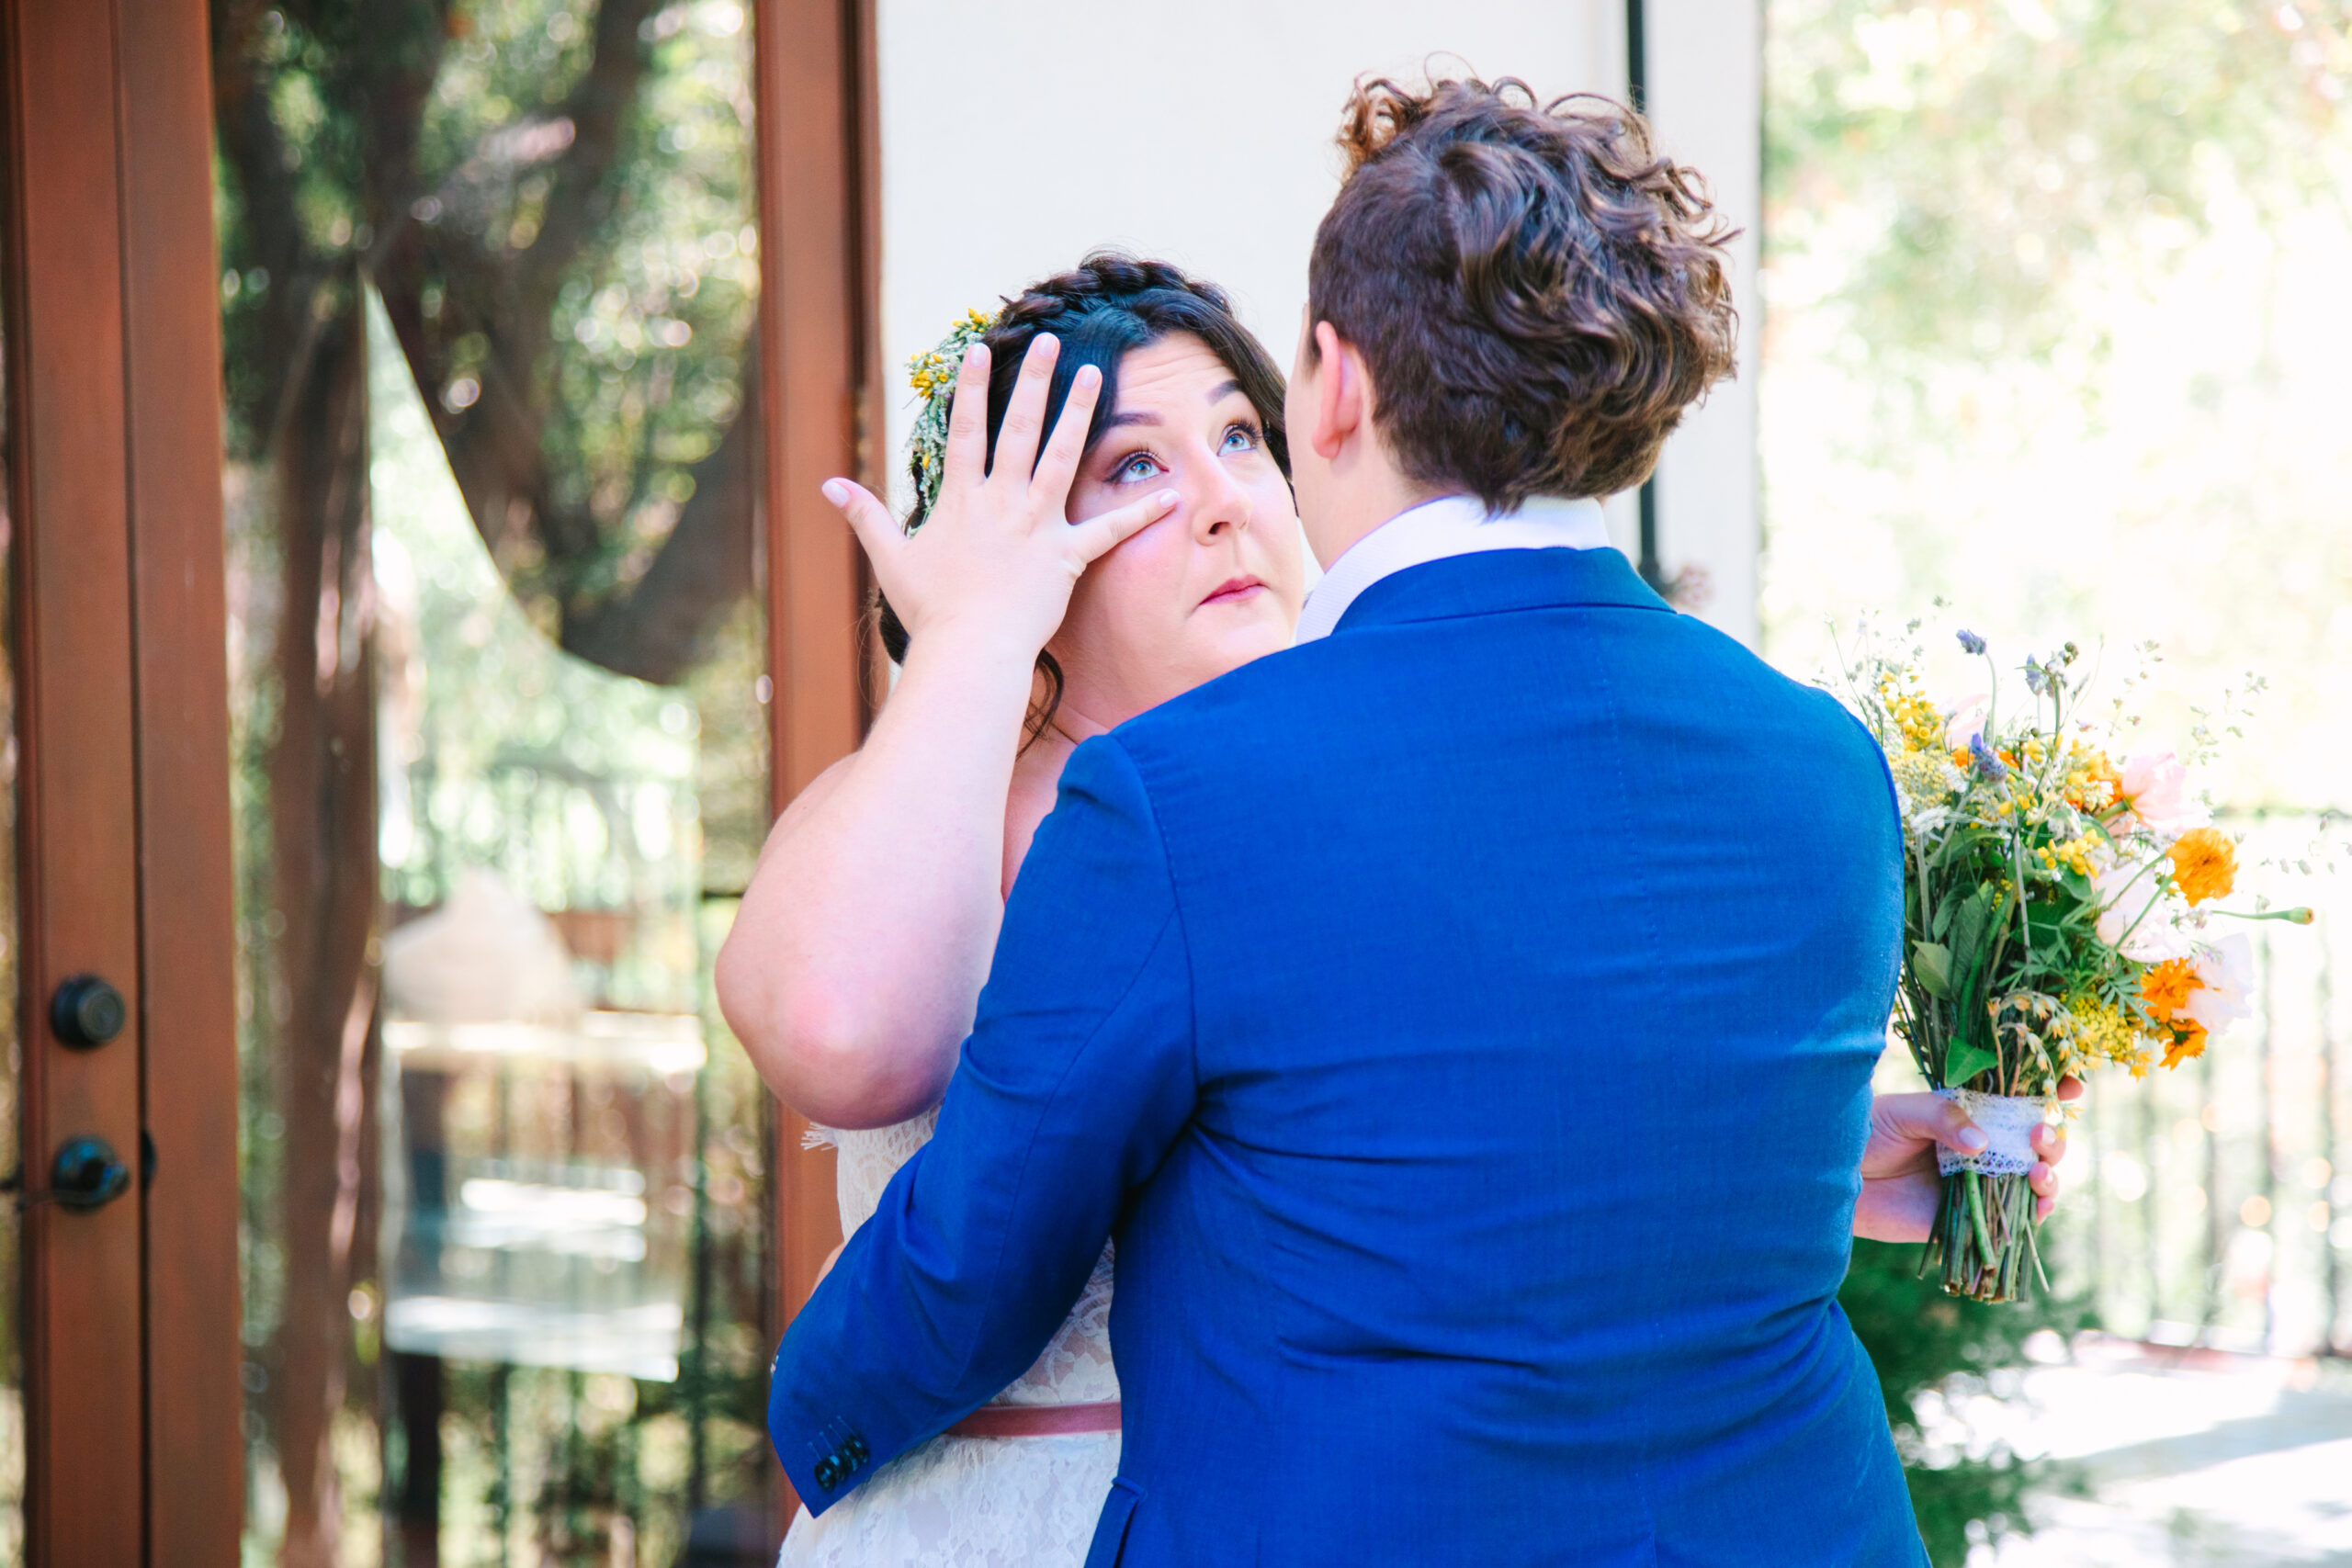 2 brides in white wedding dress and a blue suit during their first look. los angeles wedding photographer, lgbtq wedding photographer, gay wedding photographer